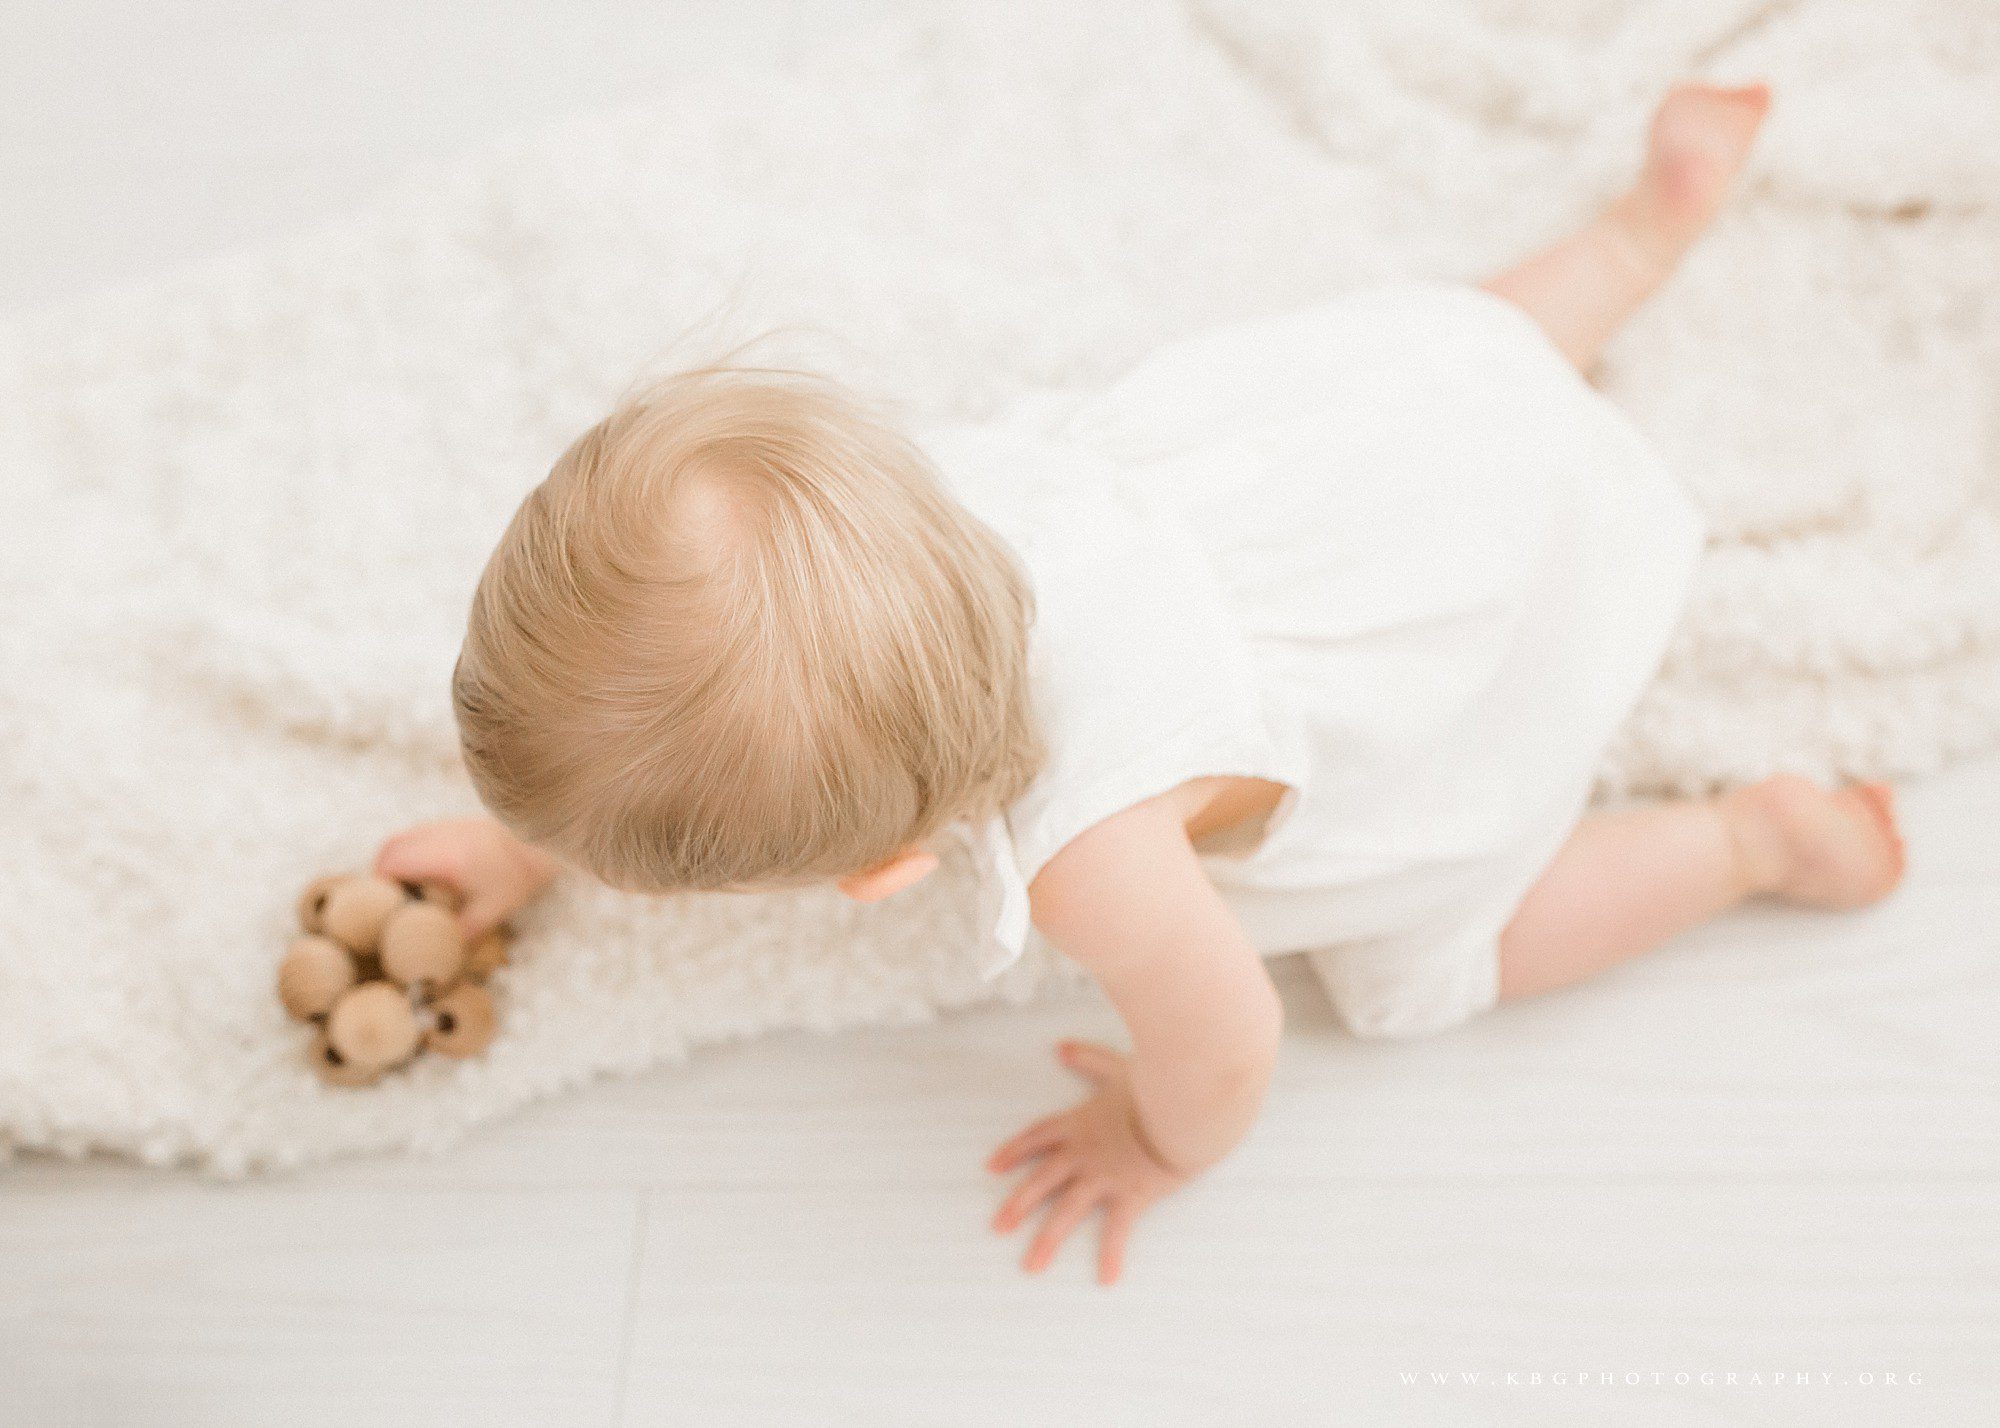 marietta family photographer - one year old baby playing with a toy on a blanket